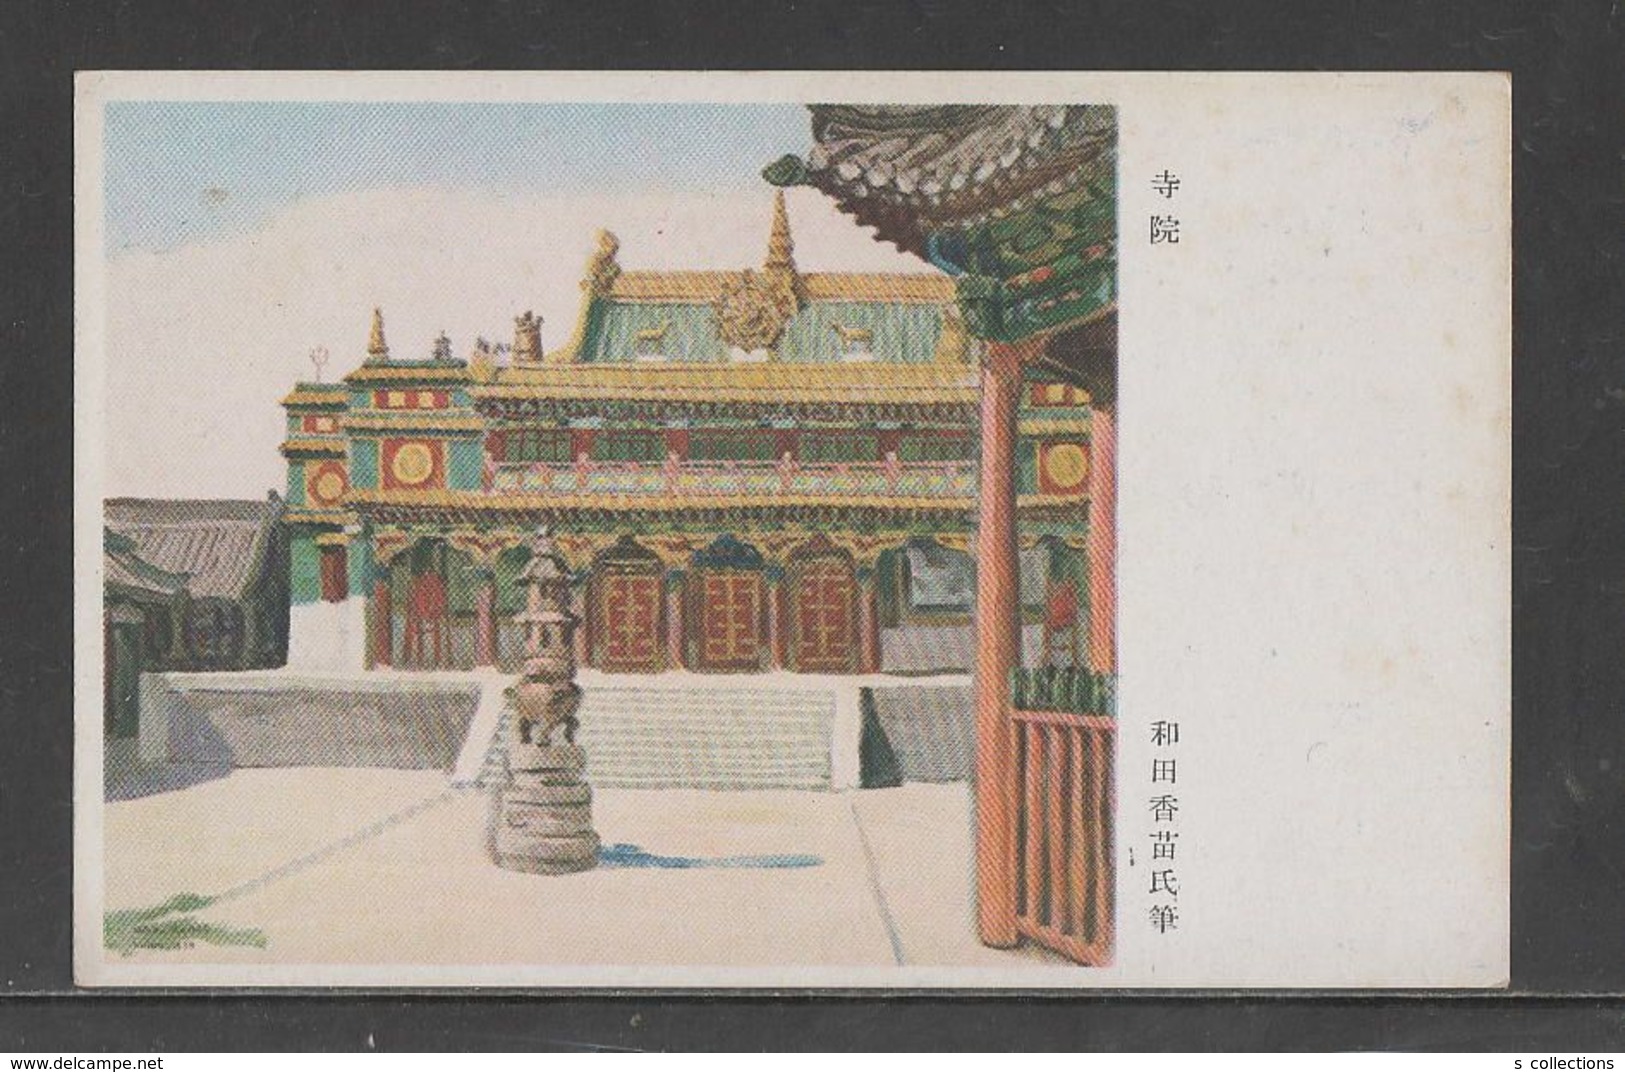 JAPAN WWII Military Temple Picture Postcard SOUTH CHINA WW2 MANCHURIA CHINE MANDCHOUKOUO JAPON GIAPPONE - 1943-45 Shanghai & Nanjing